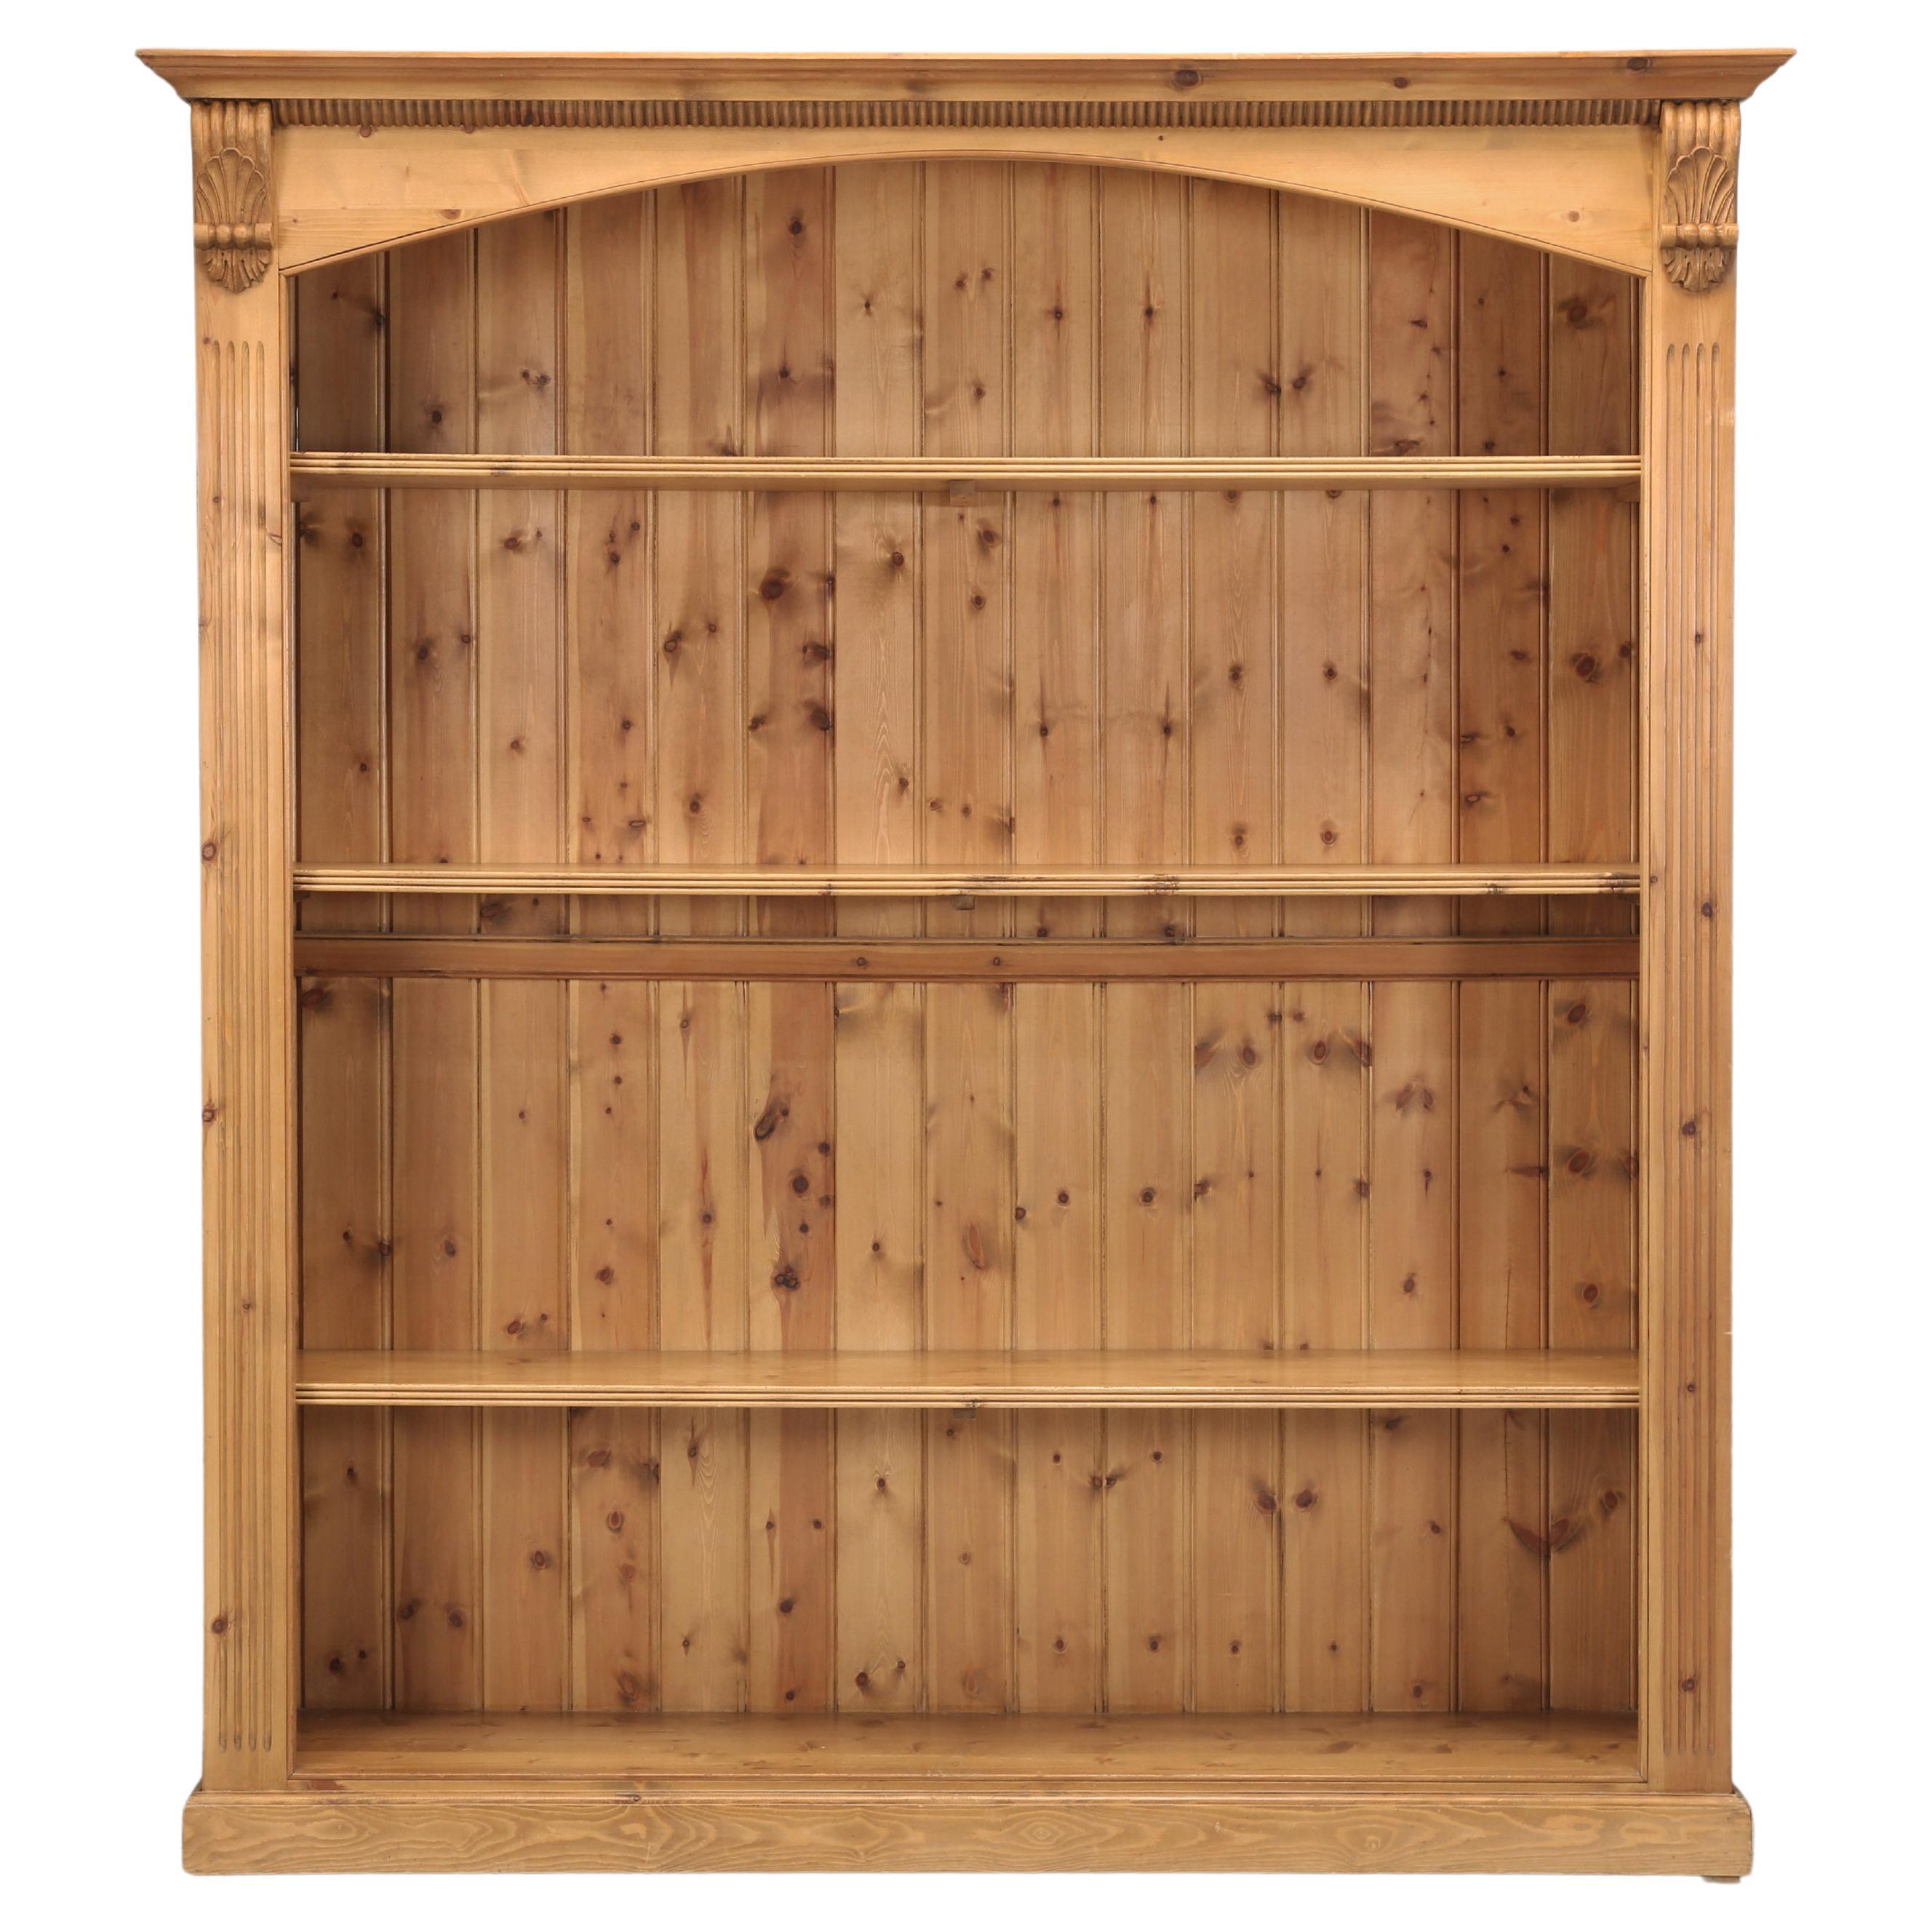 English Pine Country Bookcase Over 6 Feet Wide, Traditional Beeswax by Chrispyn For Sale